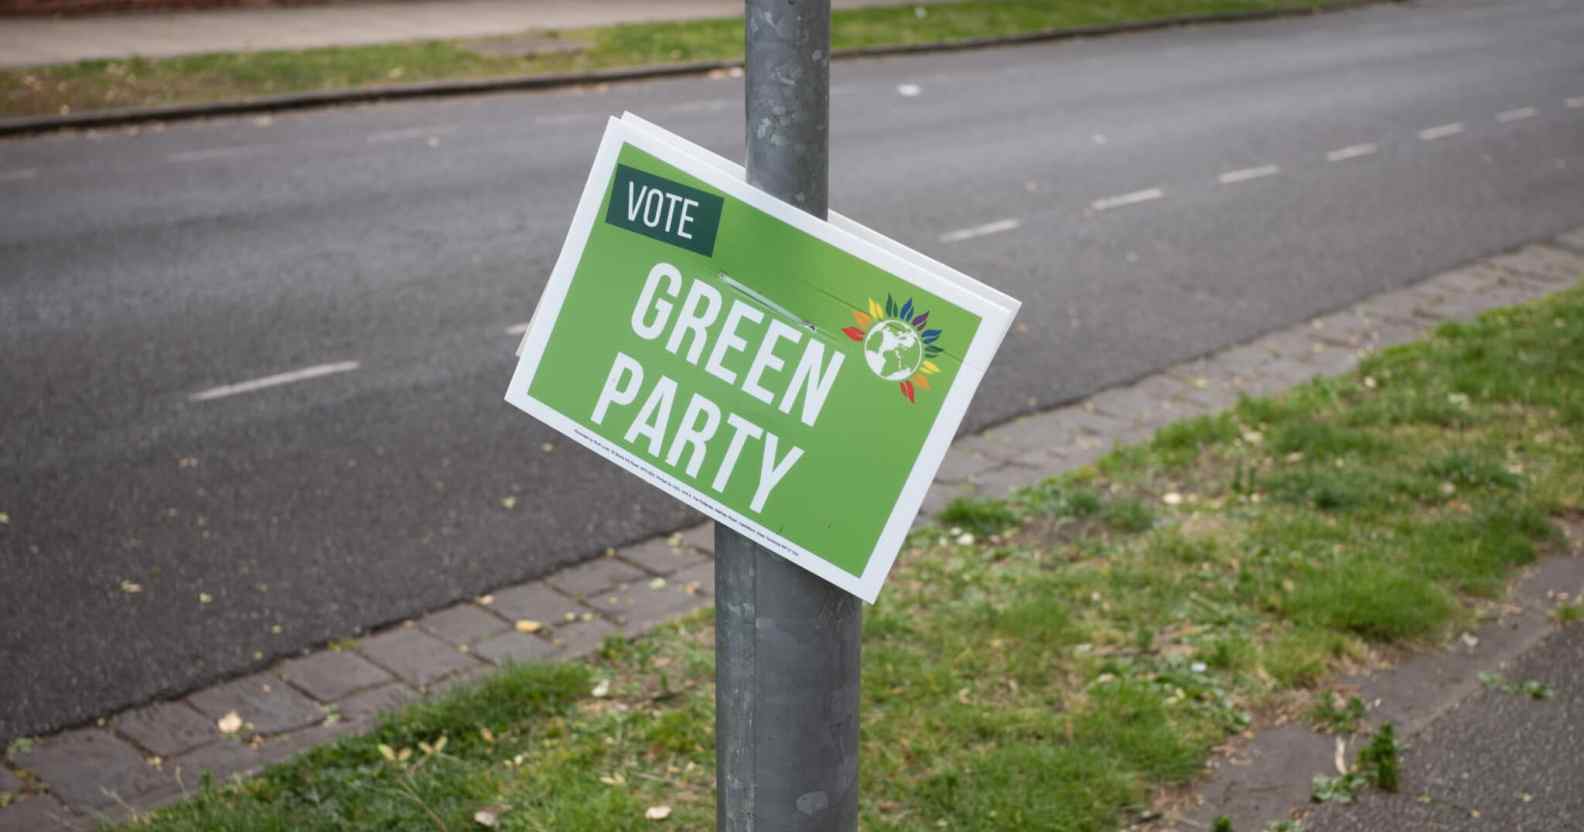 A placard promoting the Green Party hangs from a lamppost ahead of the by-election on June 18, 2022 in Wakefield, England.